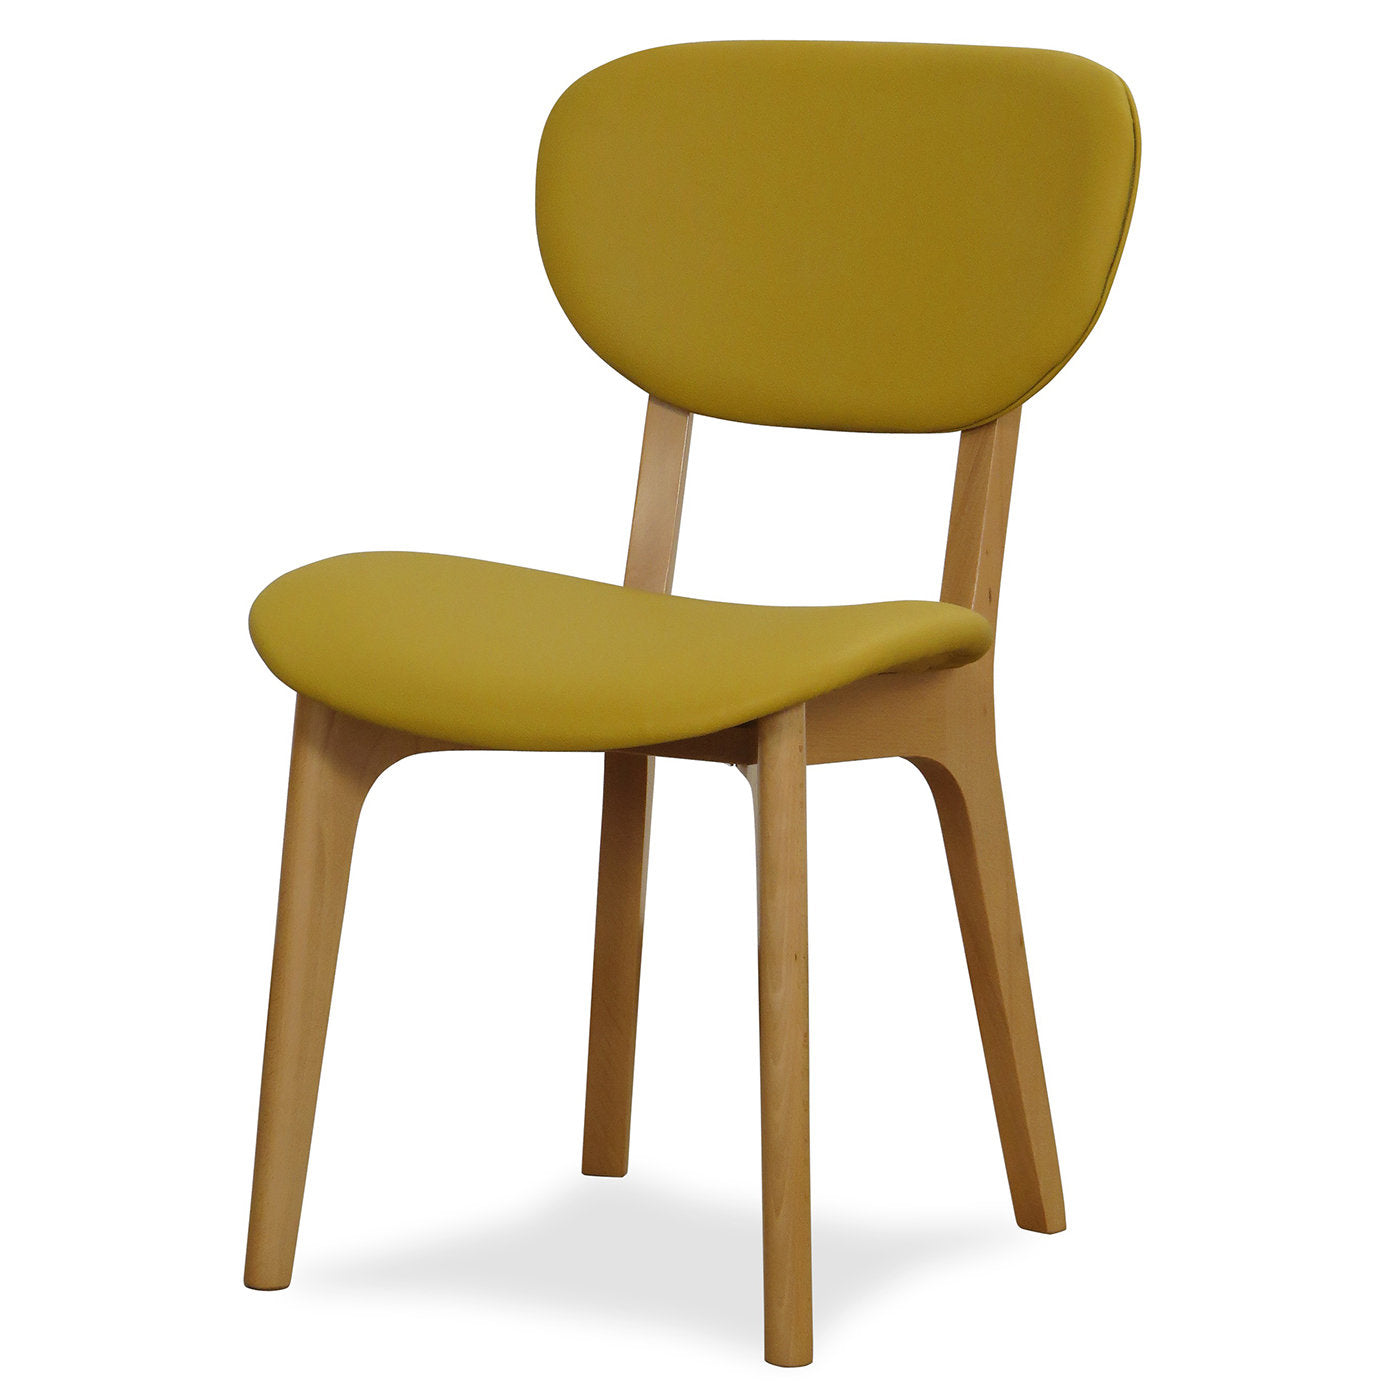 Cozy Set of 2 Mustard Chairs by Giacomo Cattani - Alternative view 4